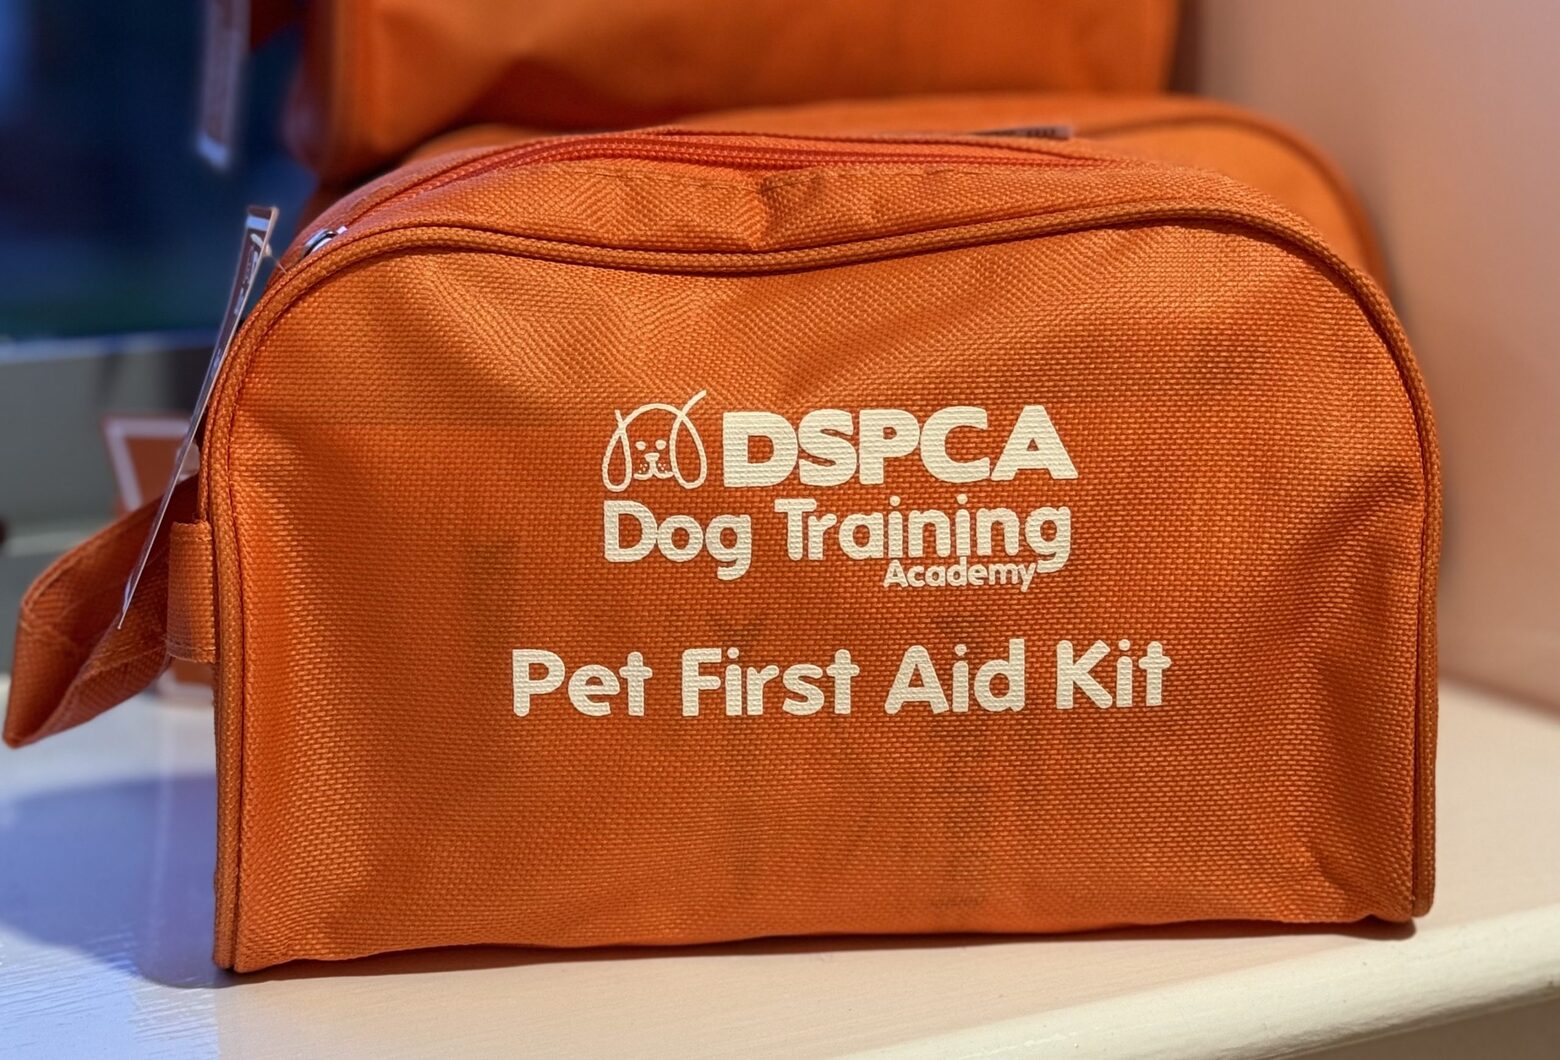 What Should Be In A Dog First Aid Kit?